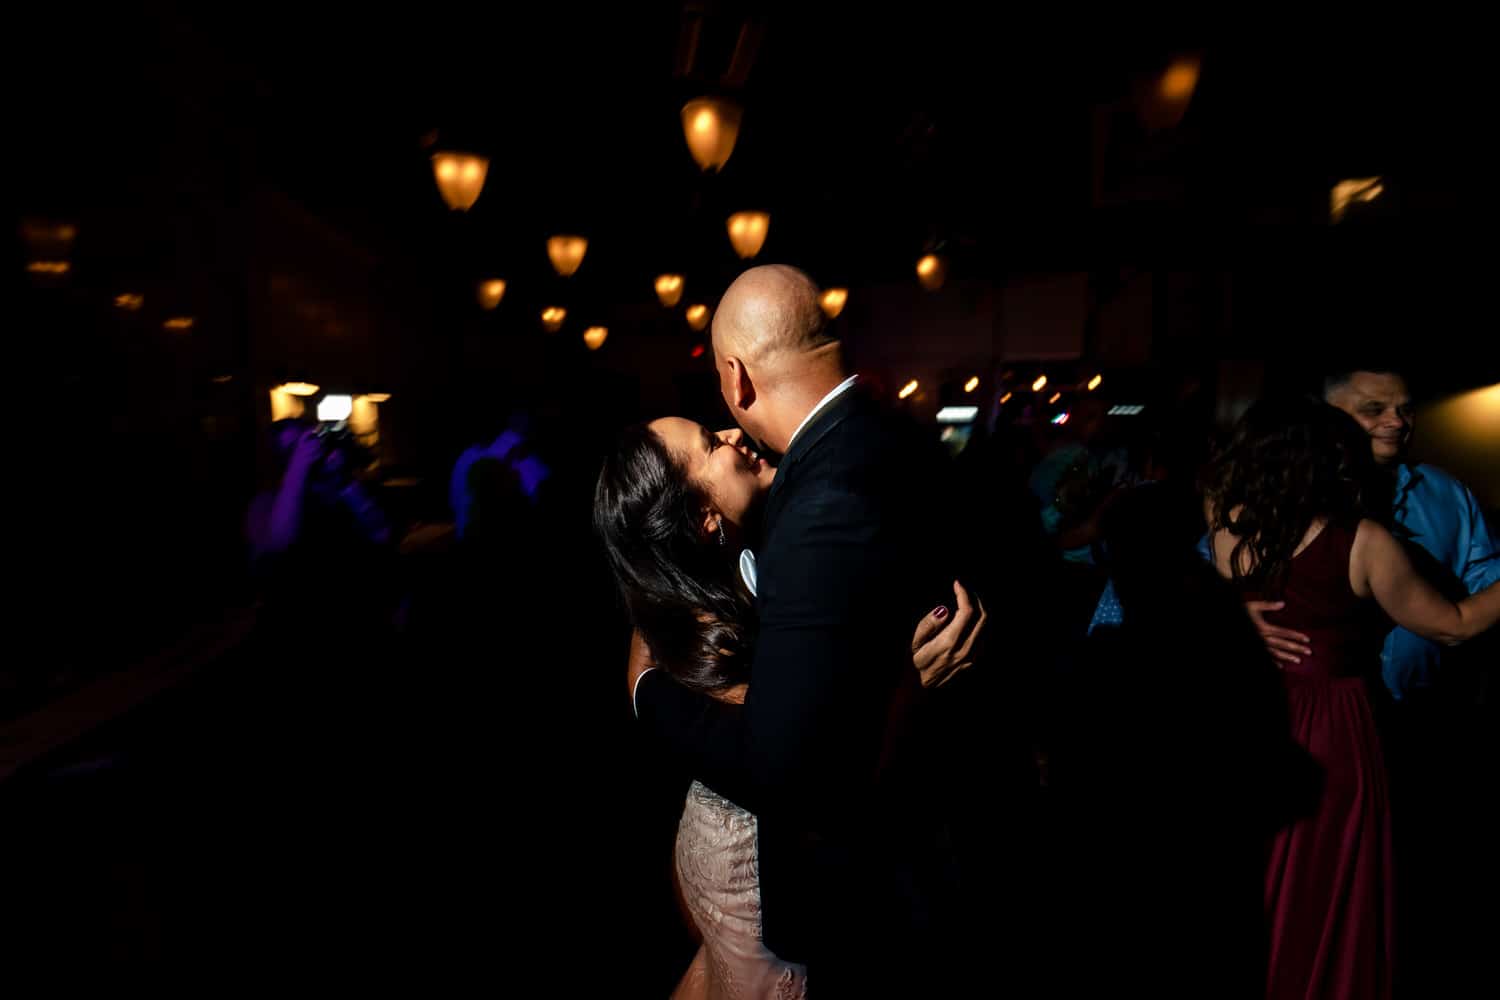 A candid, colorful picture of wedding guests dancing on the dancefloor during a wedding reception at The Station at 28 Event Space in Kansas City. 